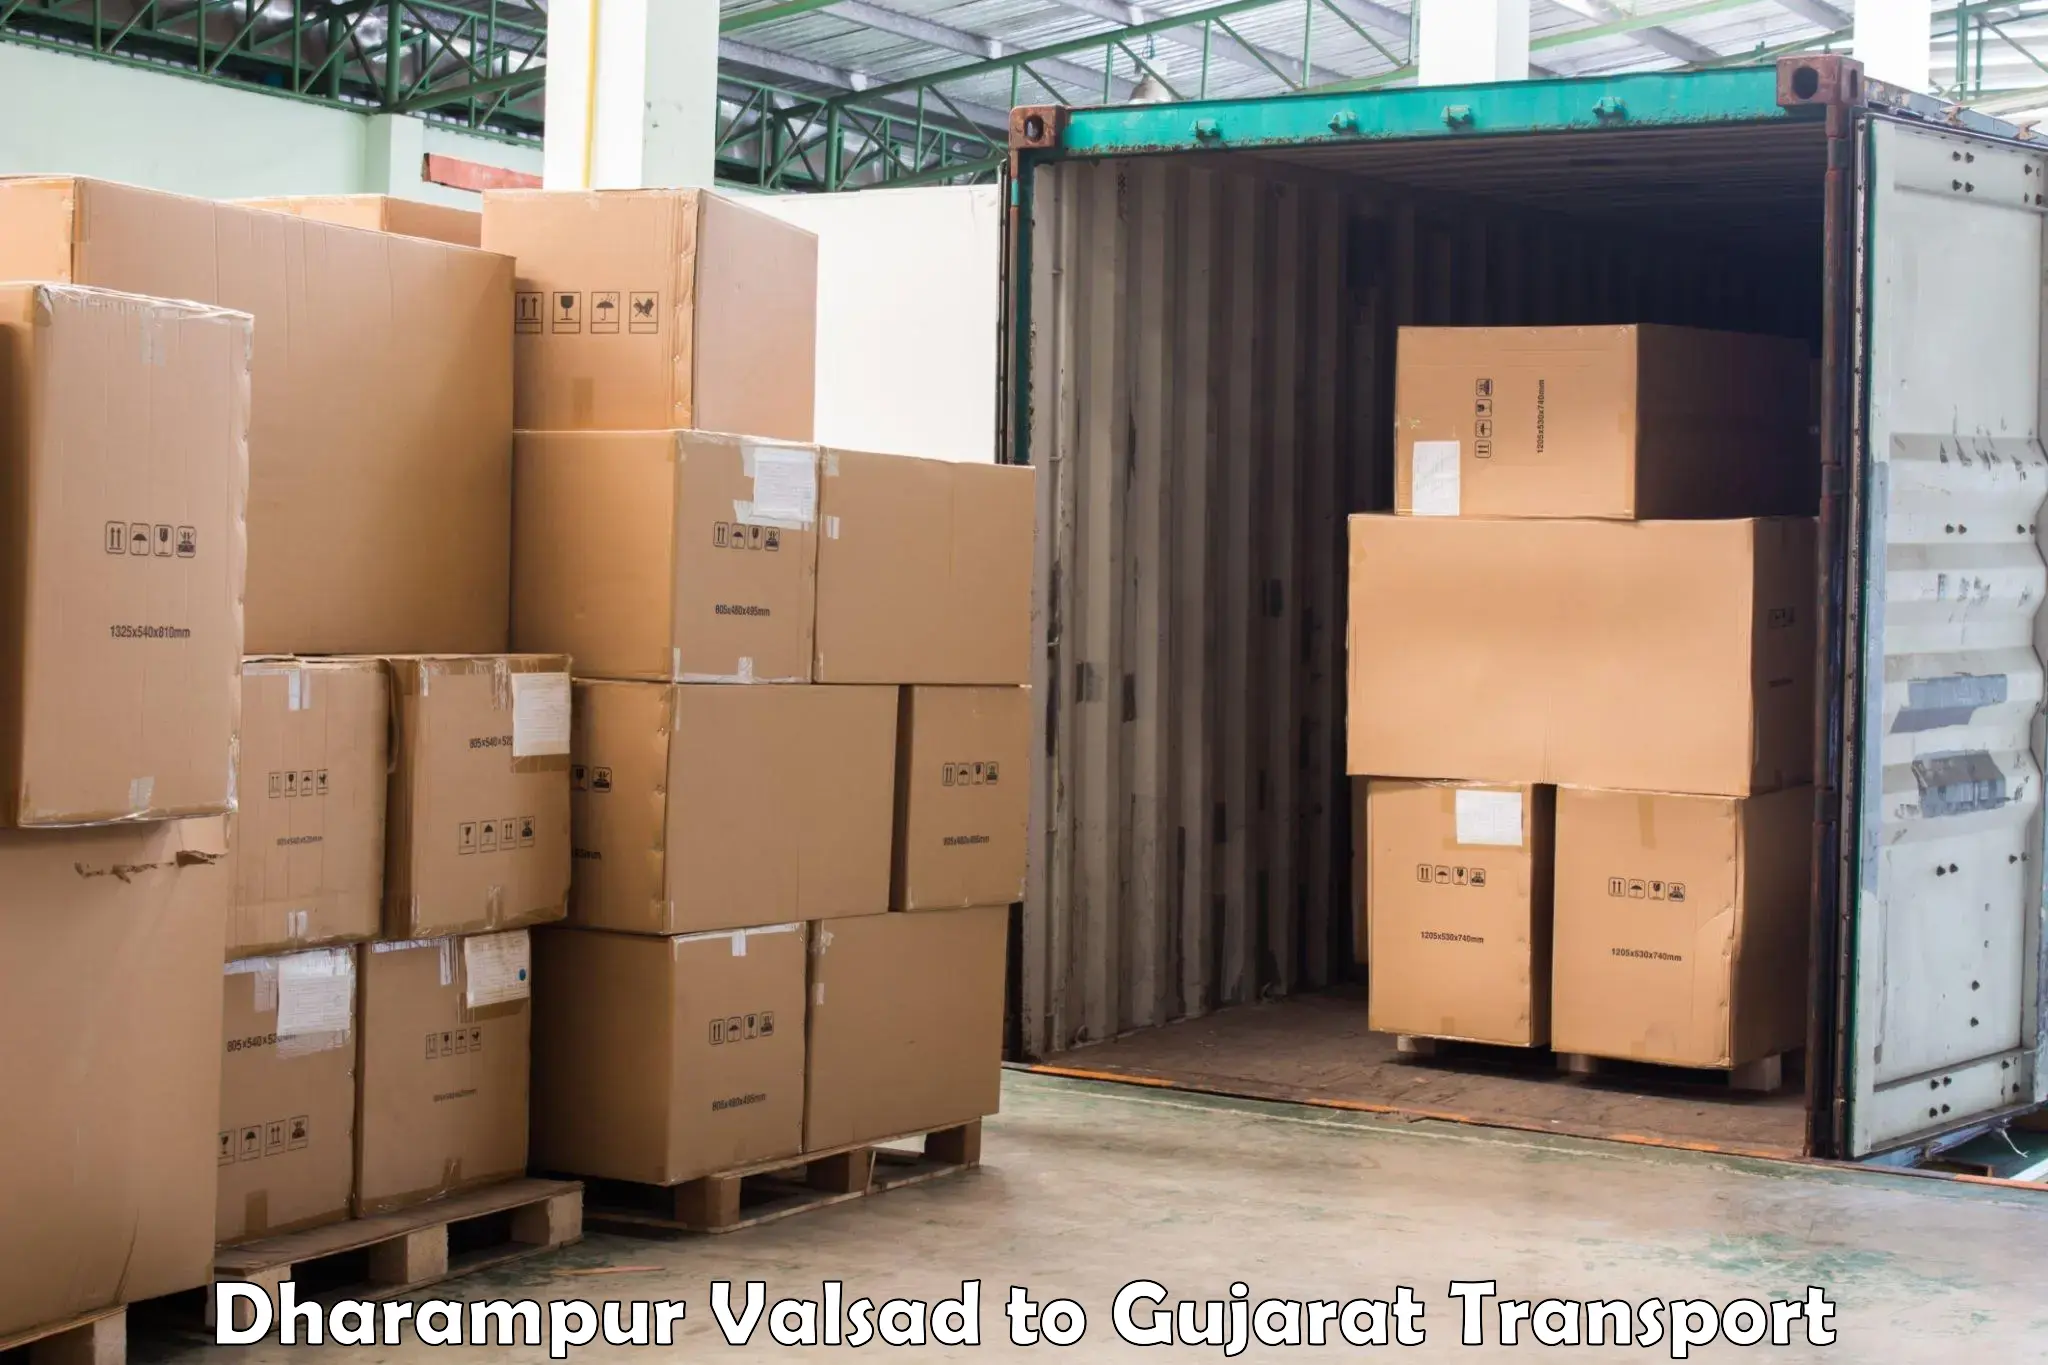 Daily parcel service transport Dharampur Valsad to Surat